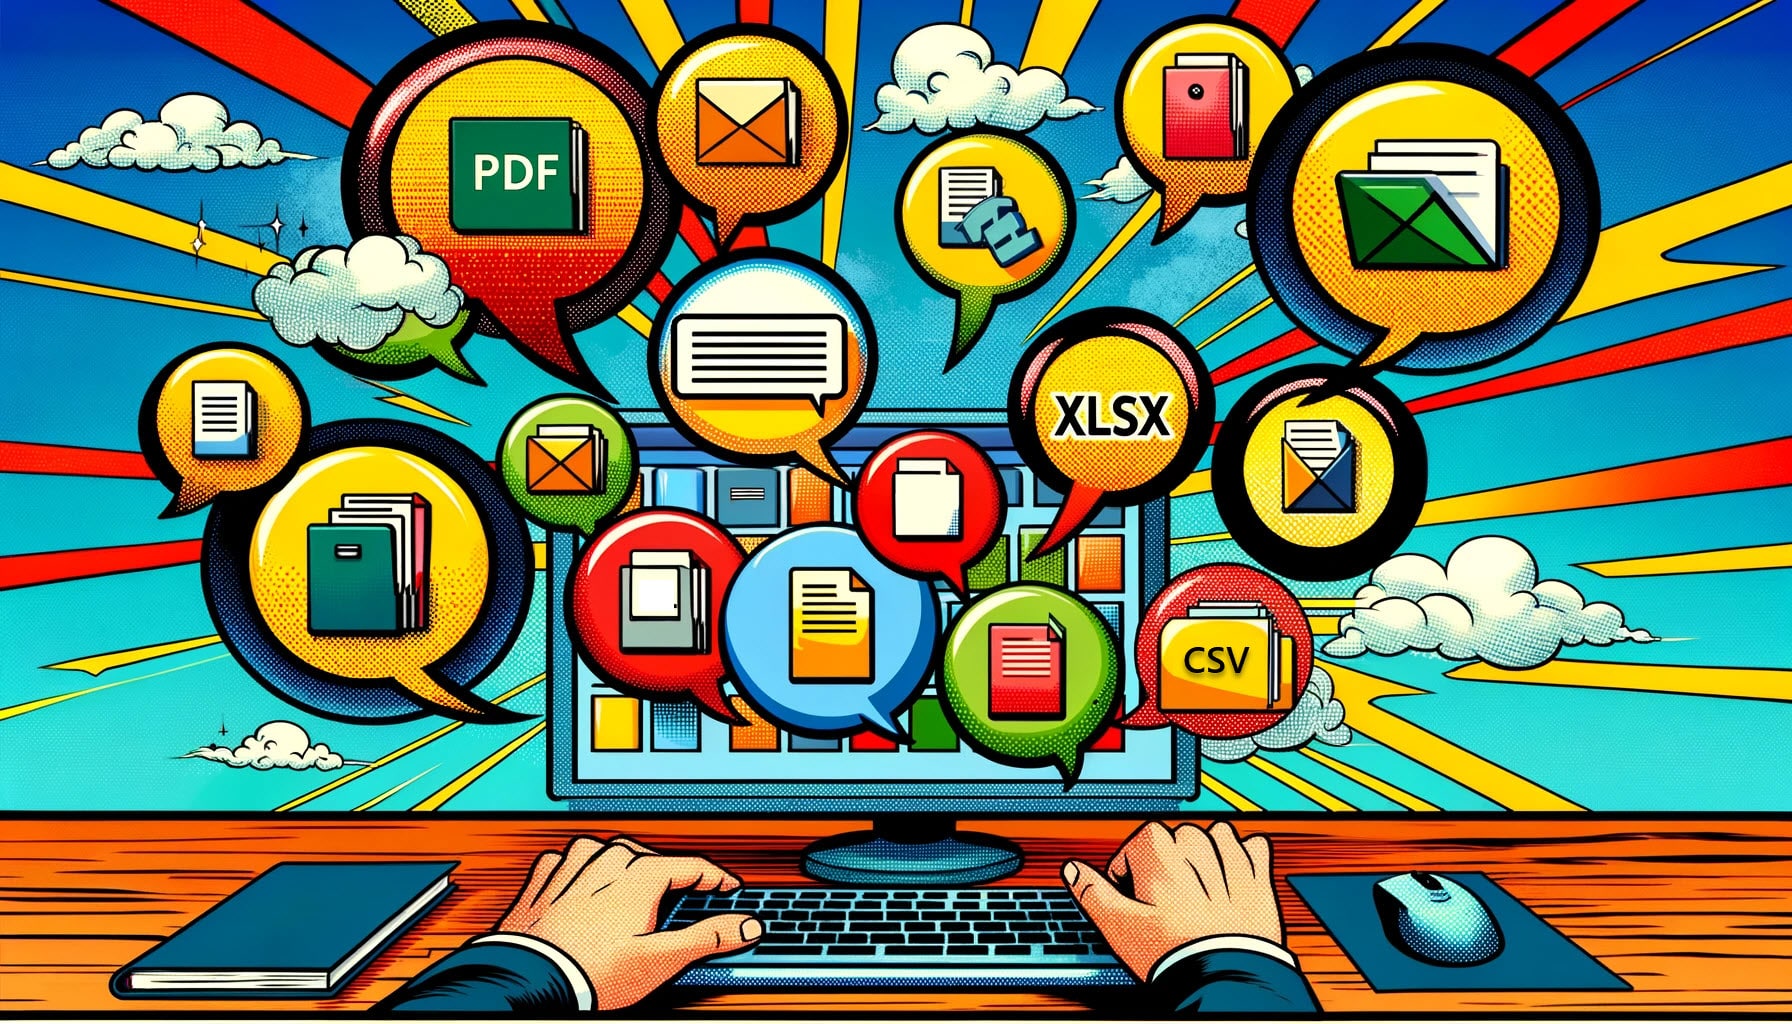 image showcases a computer screen in a vibrant, comic-style business environment, featuring bubble images representing different file types like the Microsoft Excel symbol, PDF, XLSX, XLS, XLXM, and CVS. Each file type is depicted in a fun and clear manner, emphasizing organized and efficient file management.